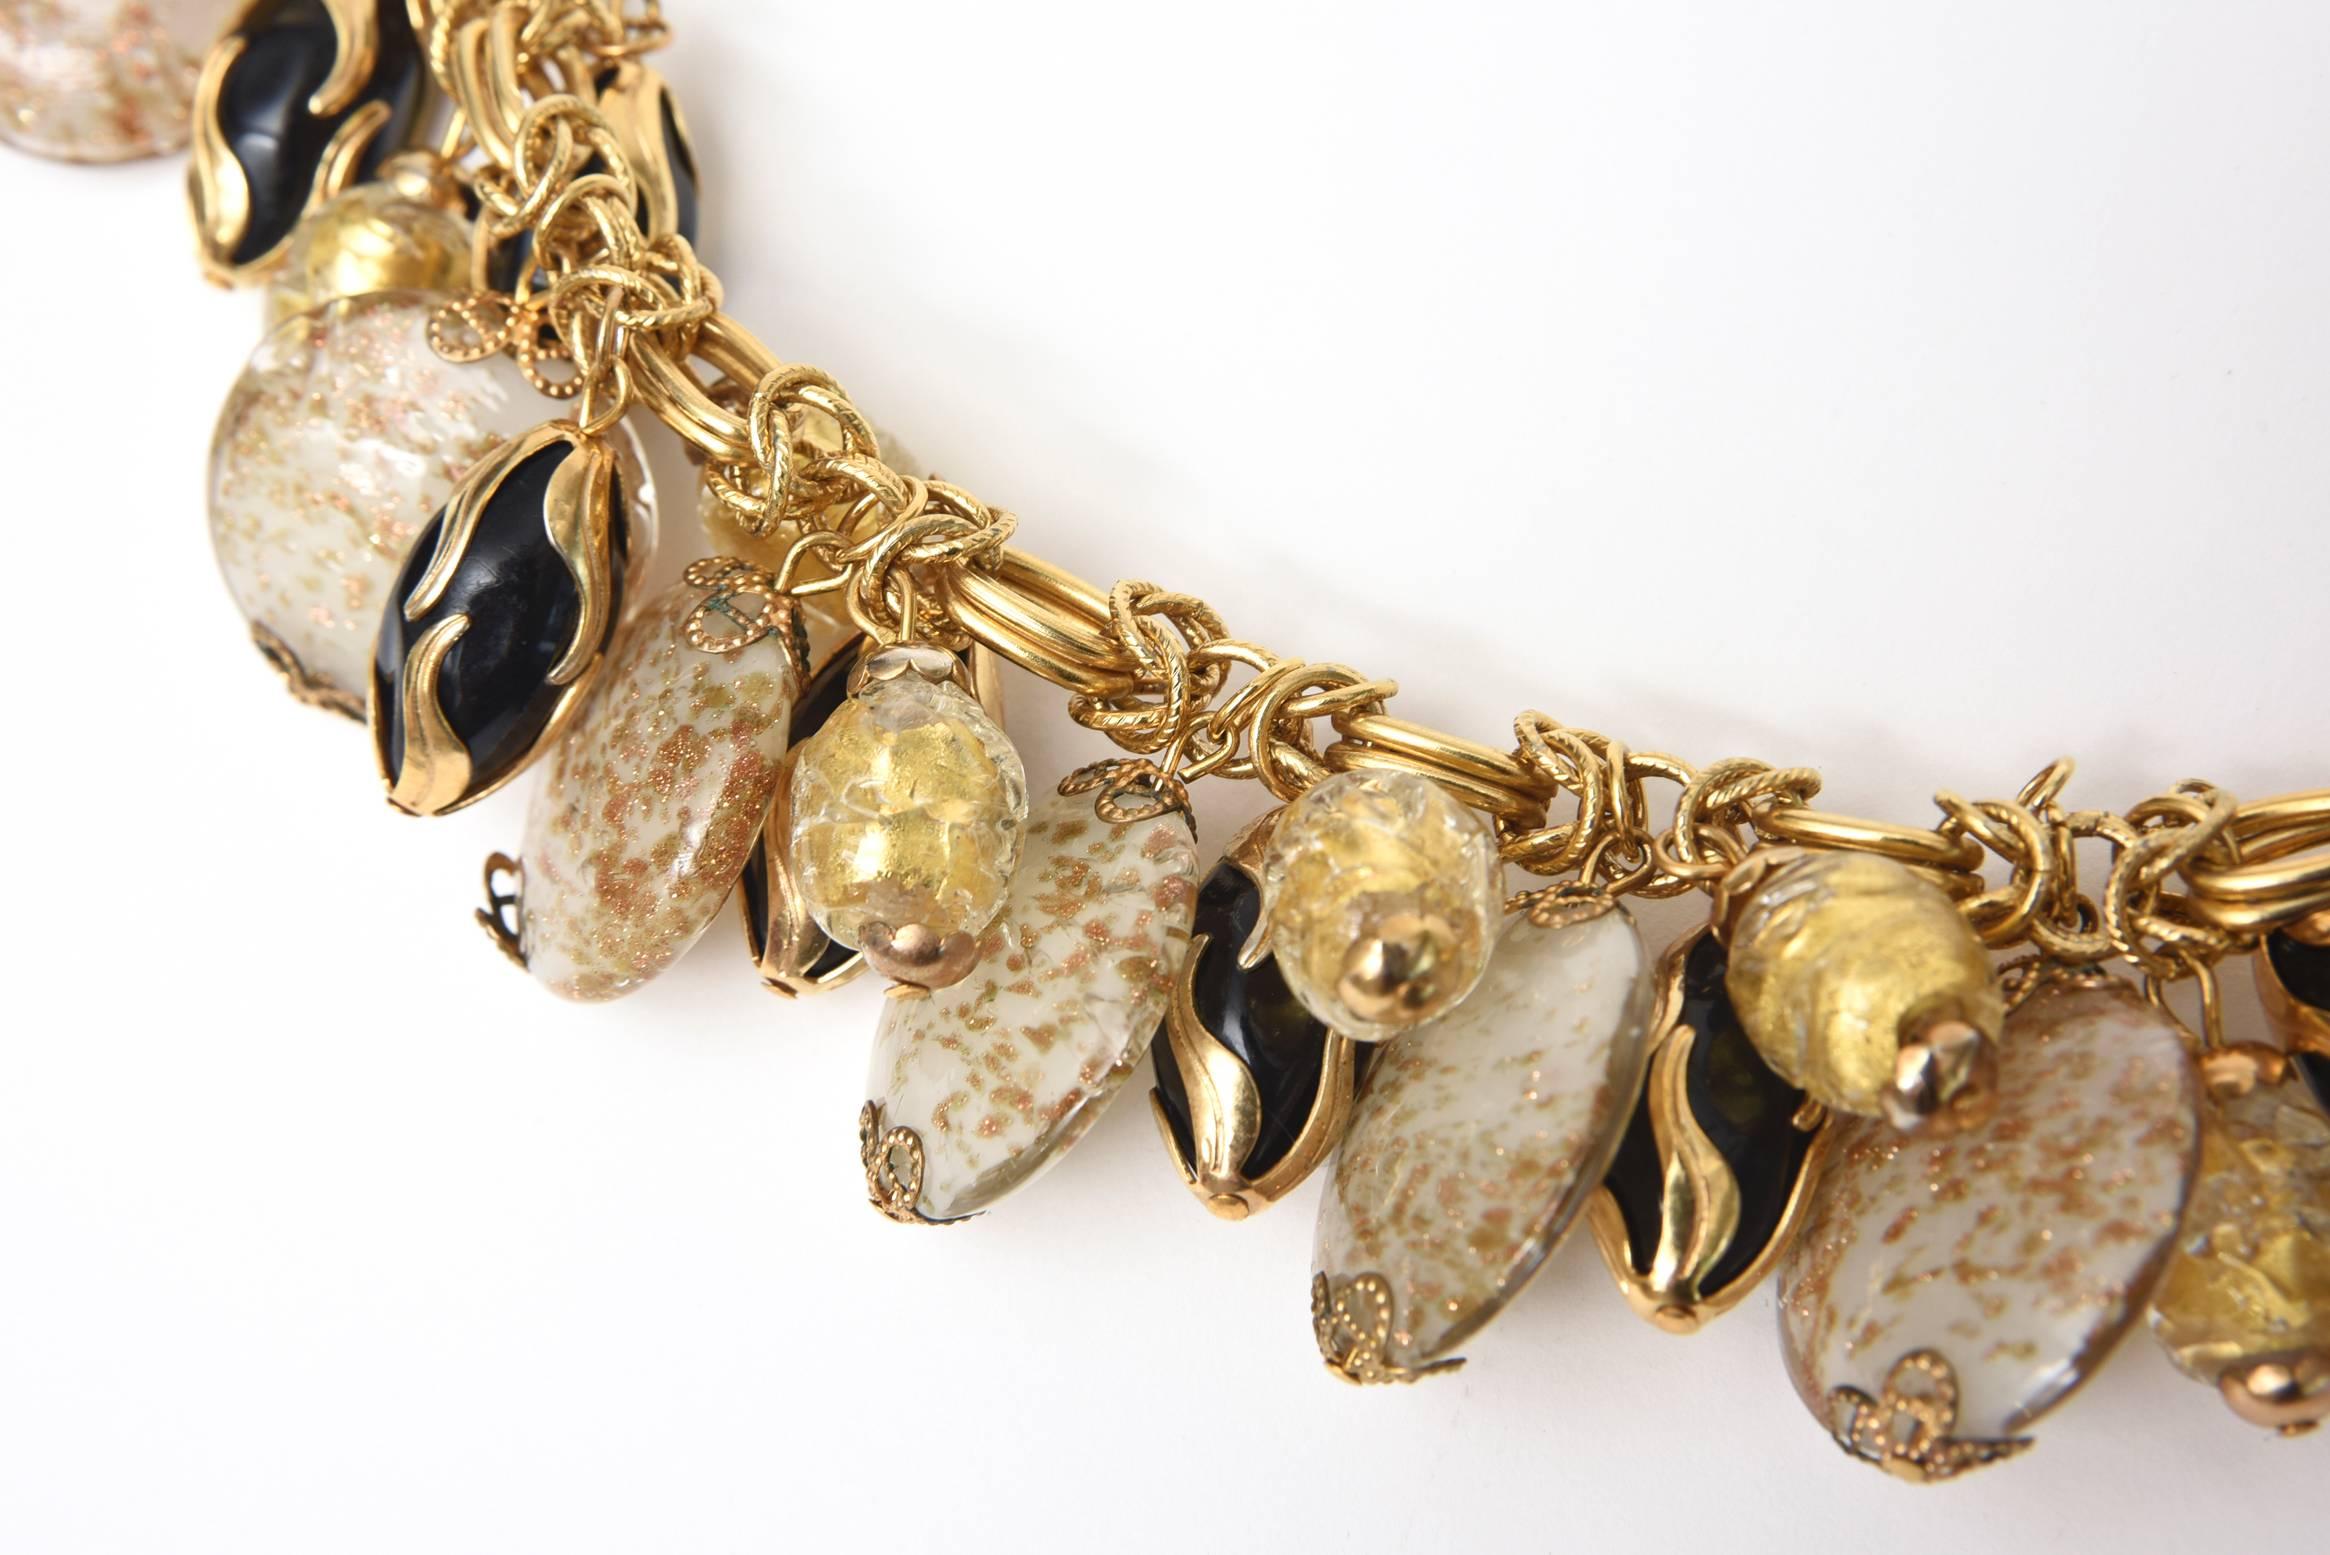 This beautiful and well executed Italian signed Assunta Giovanno dangle charm bracelet is made of  9 round disks of Murano glass with gold aventurine interspersed with black drops of resin and gold resin with gold plated applied swirls. Her work are